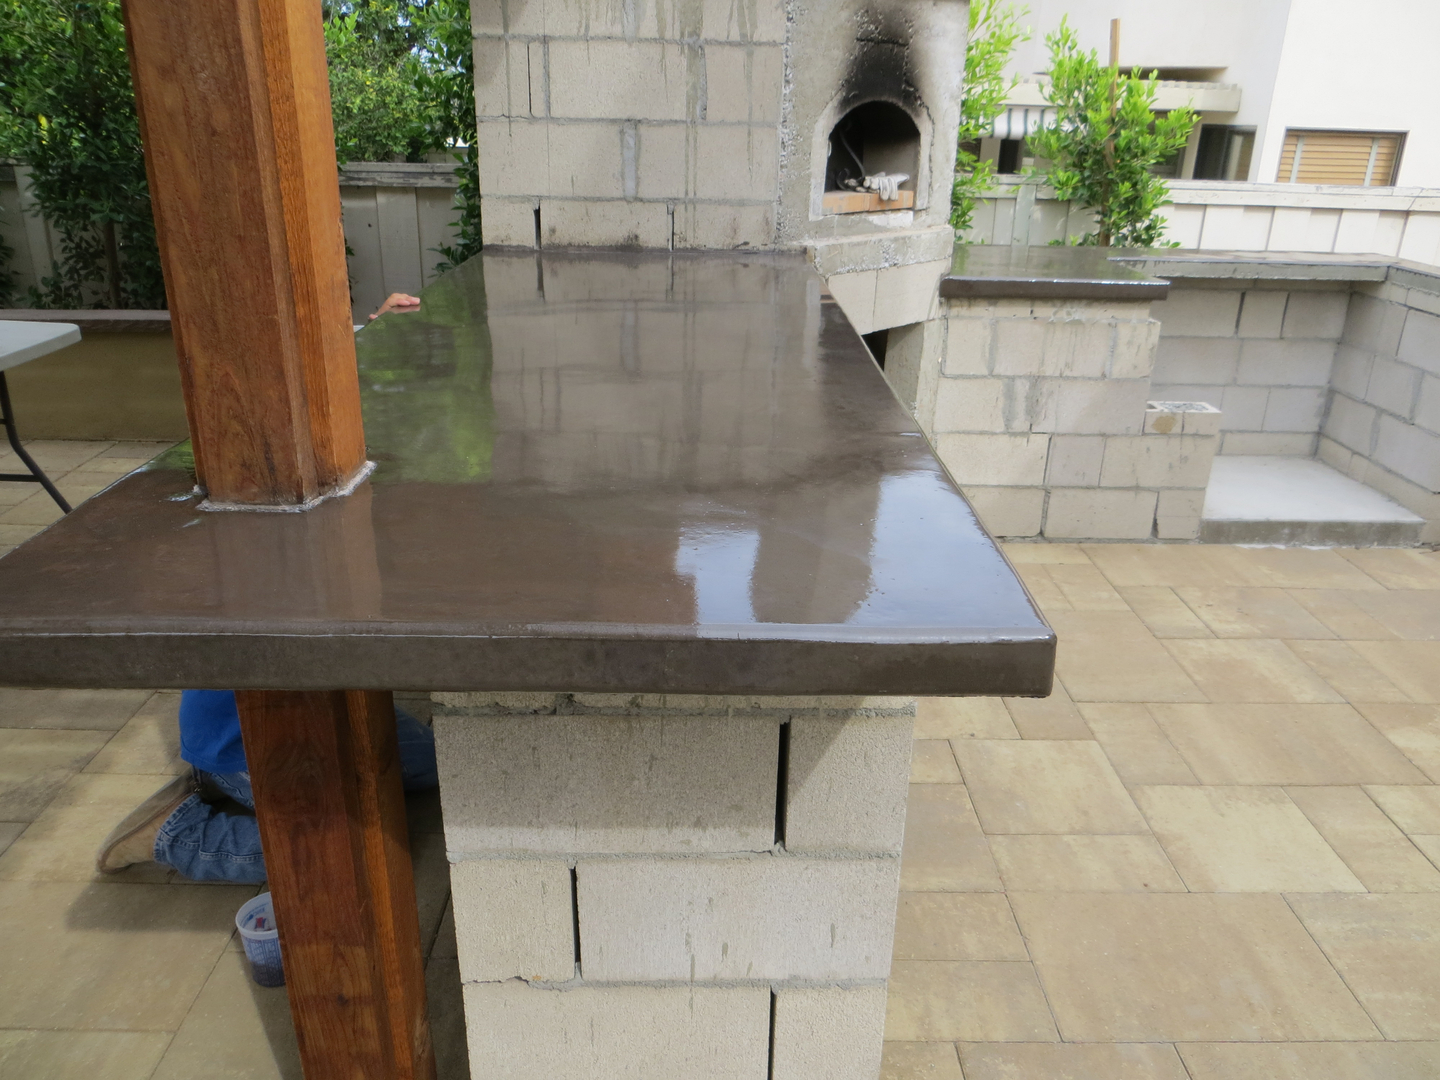 A Granite Countertop Mounted on a Cement Brick Platform